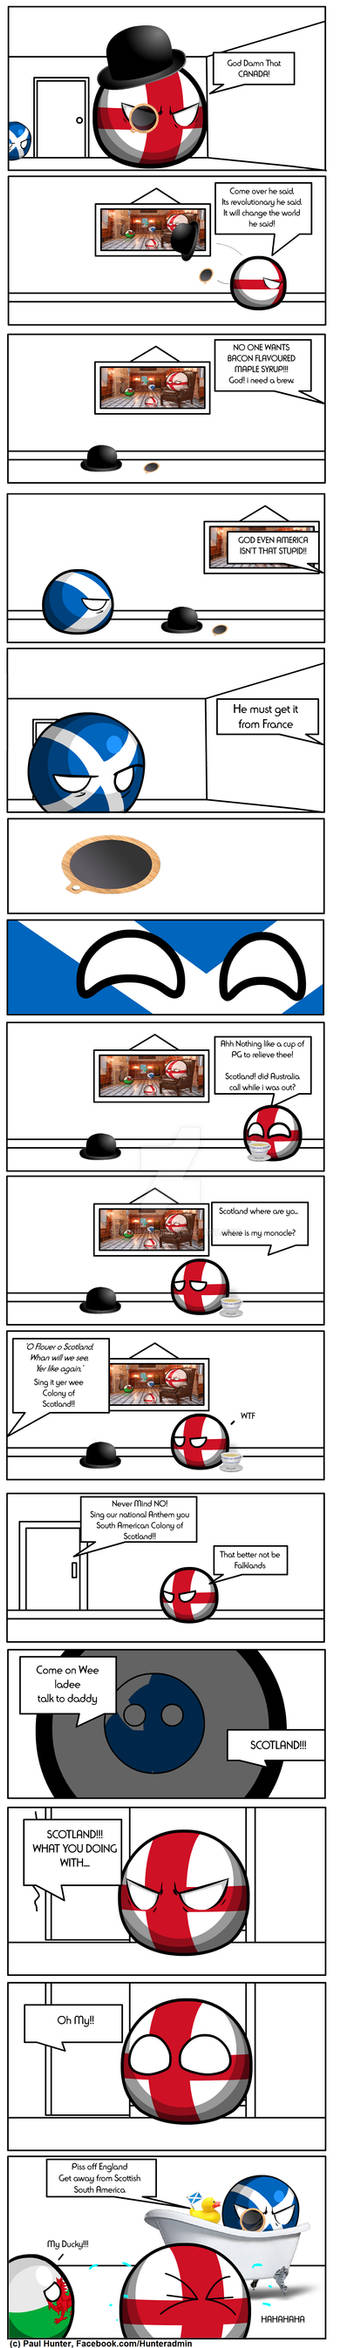 Countryball The Monocle